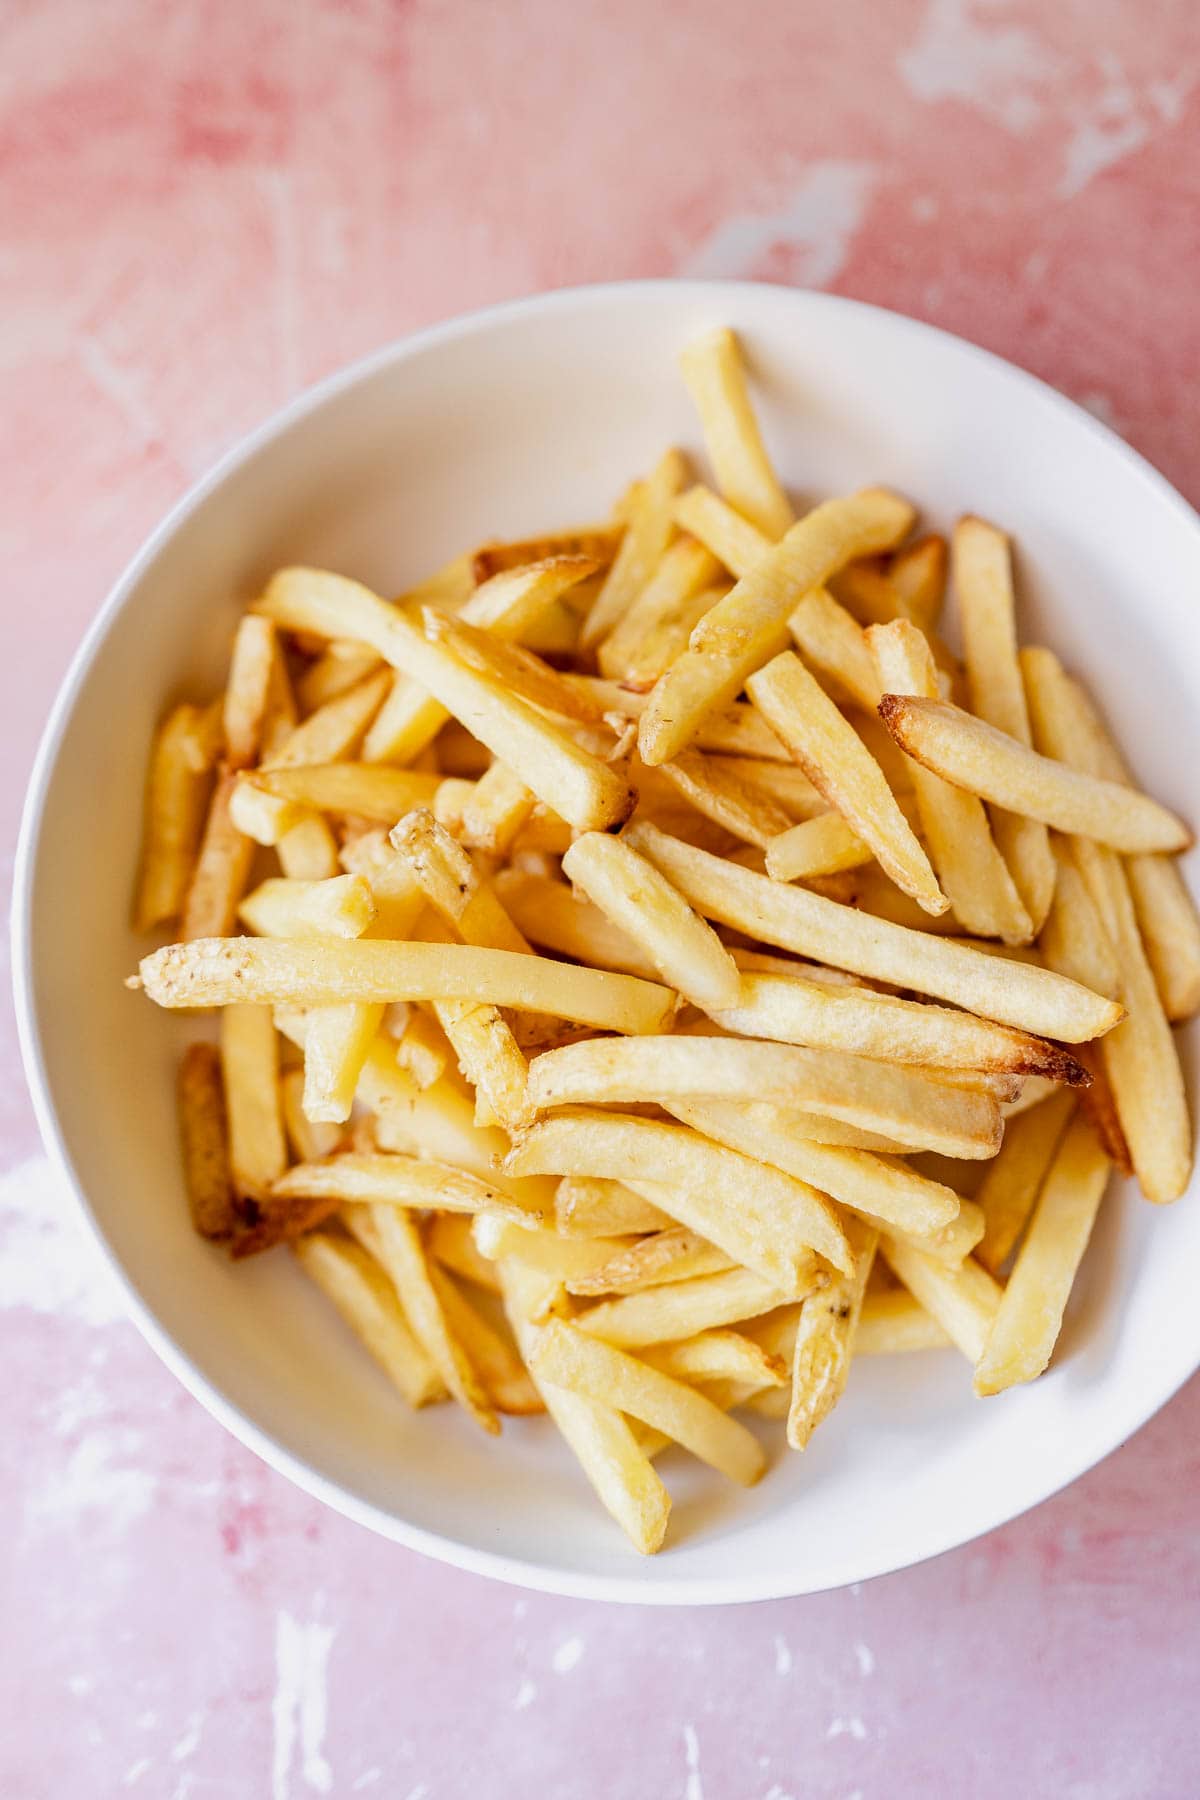 A bowl of golden air fryer frozen french fries on a pink surface.